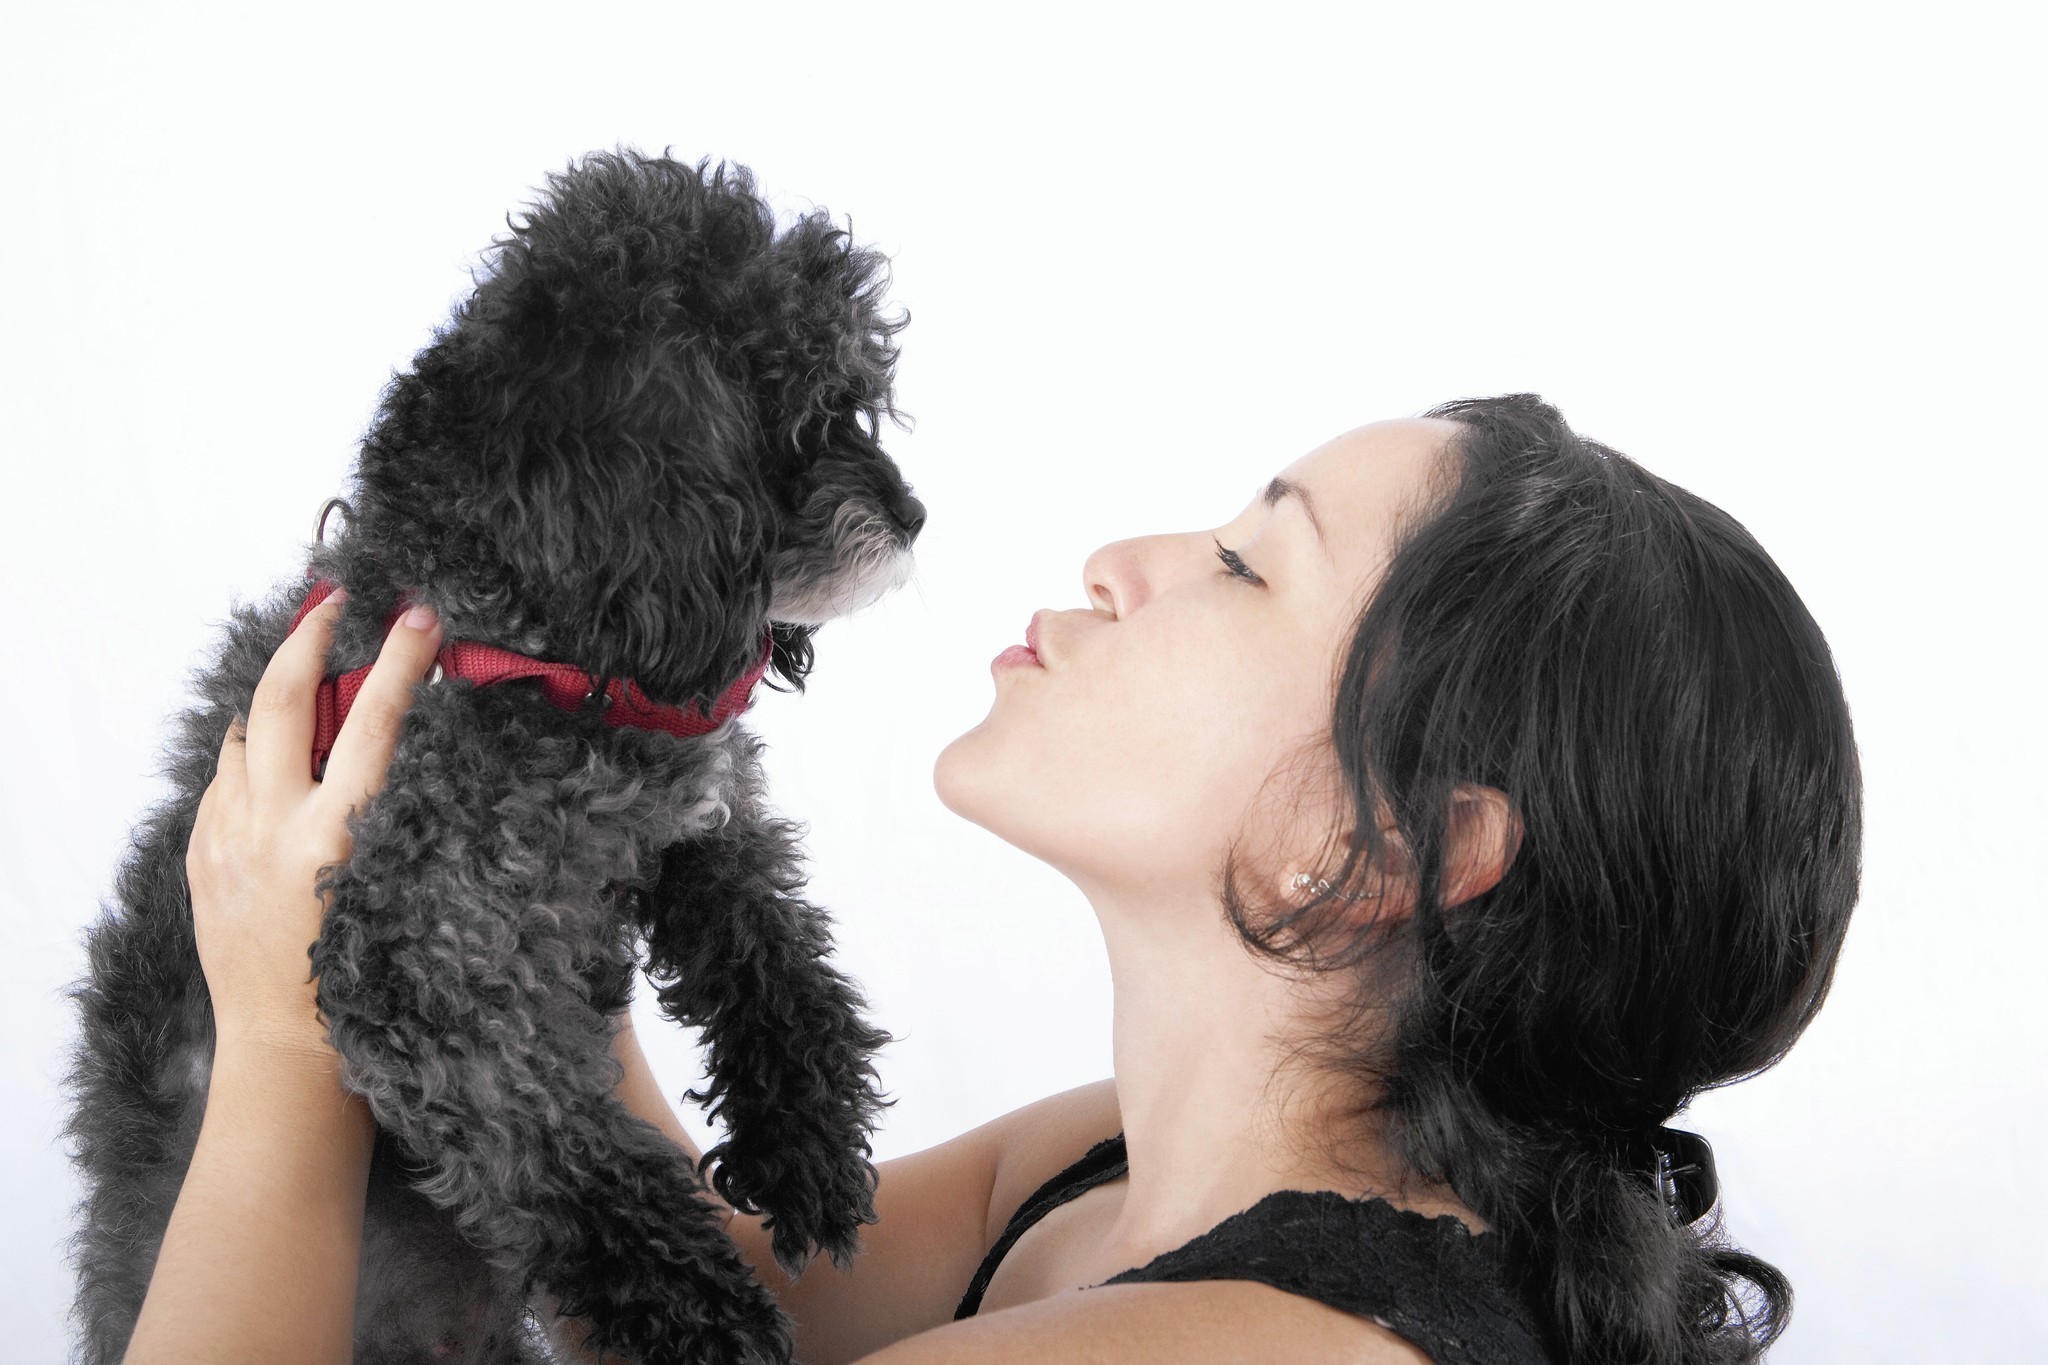 Partner kisses dog, then you. How to handle it. - Chicago Tribune2048 x 1365